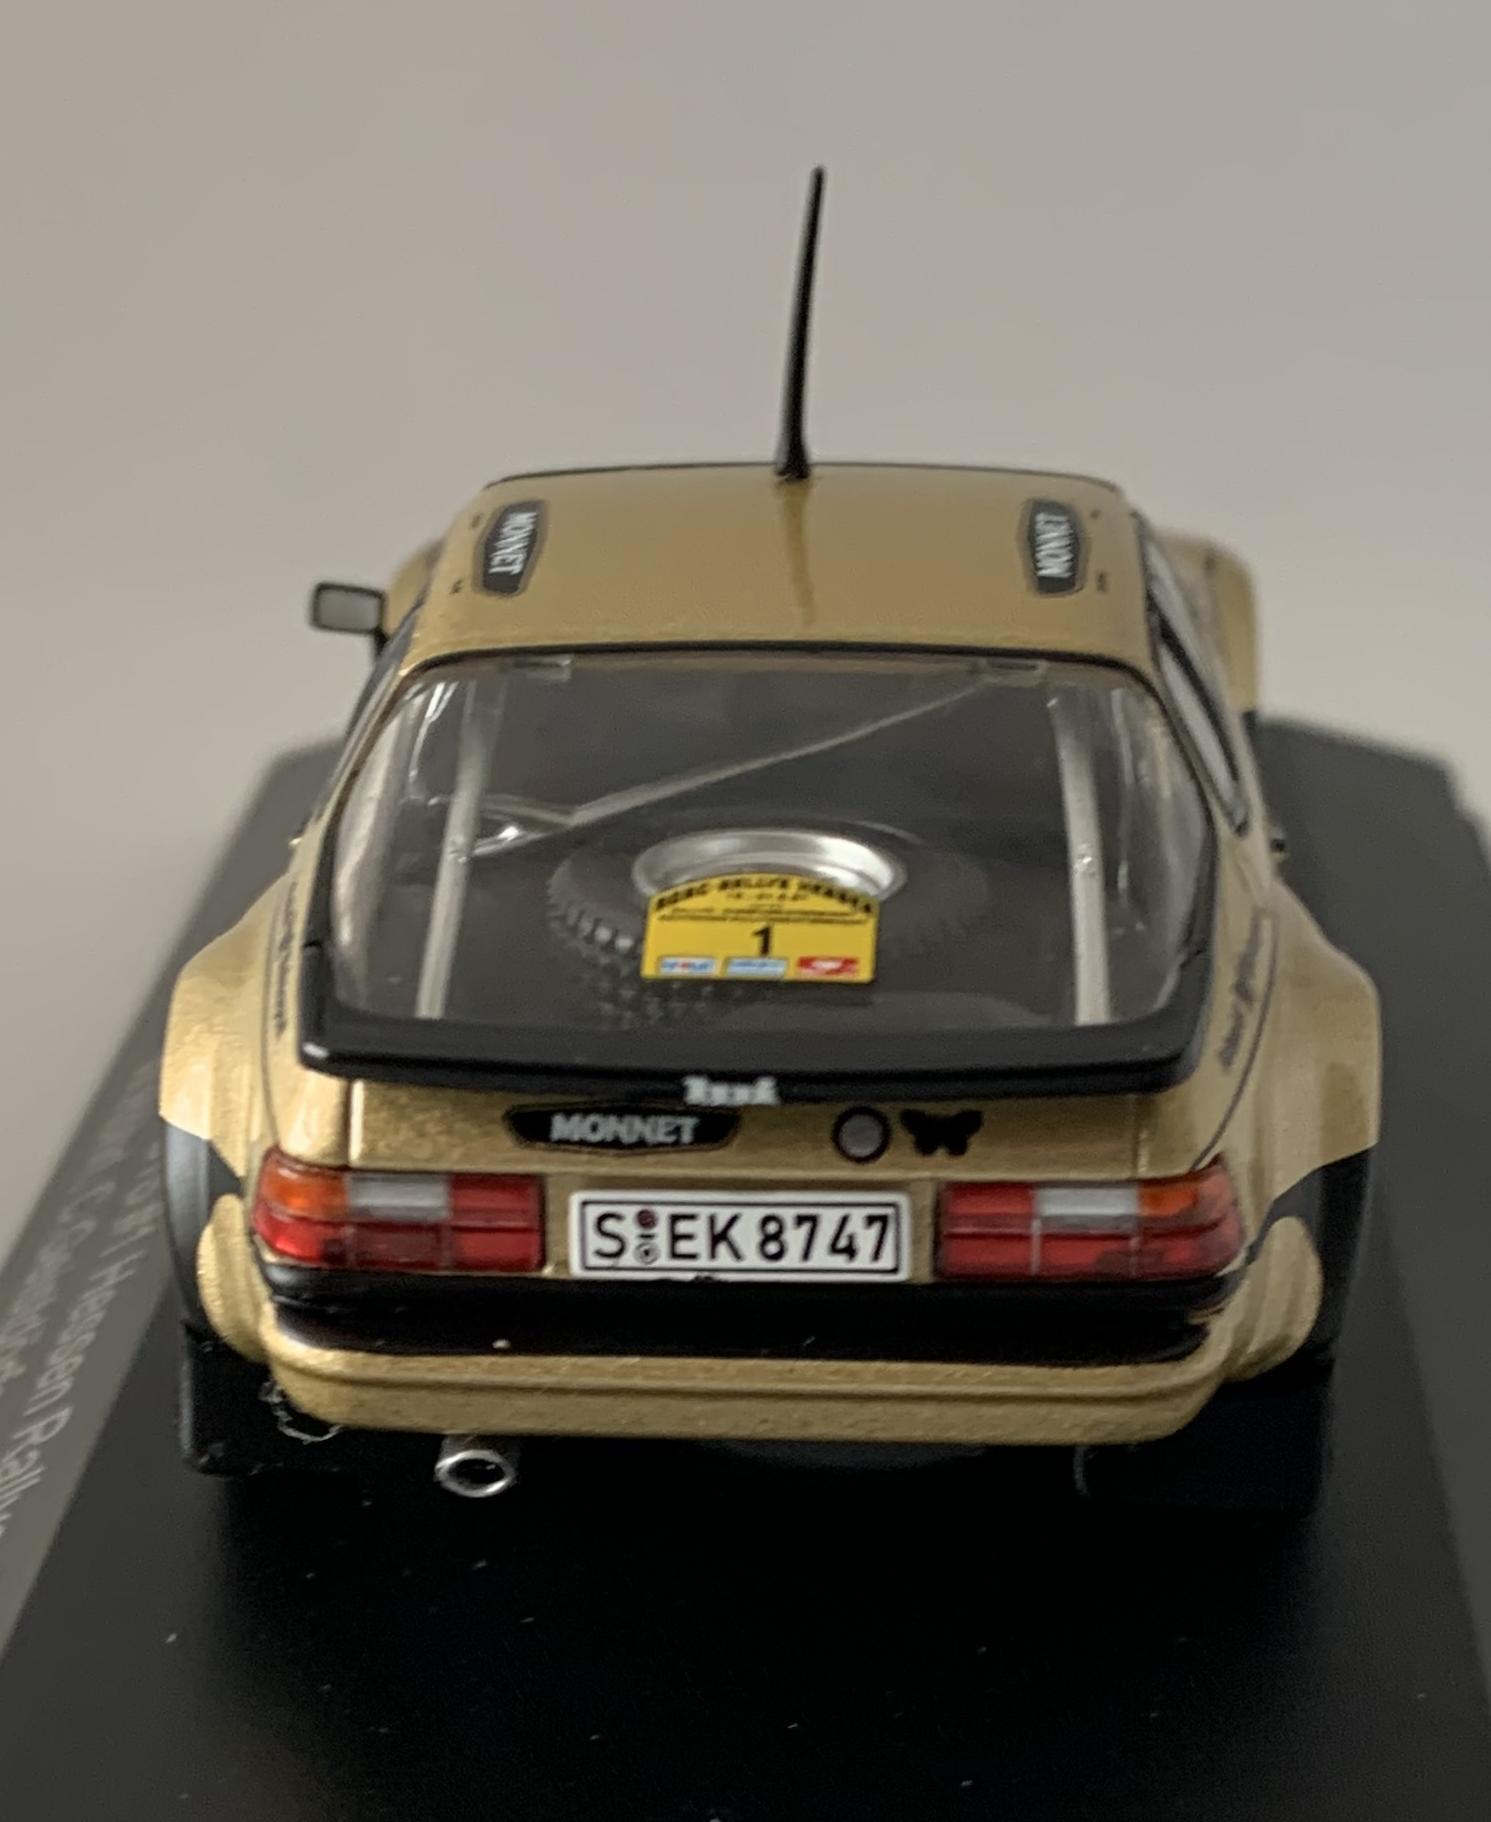 A very high quality accurate representation with authentic graphics of the Porsche 924 Carrera GTS #1 Winner from the 1981 Hessen Rallye as driven by W Rohrol and C Geistdorfer.  Features include working wheels, rear spoiler, rear mudflaps and spare wheel in rear